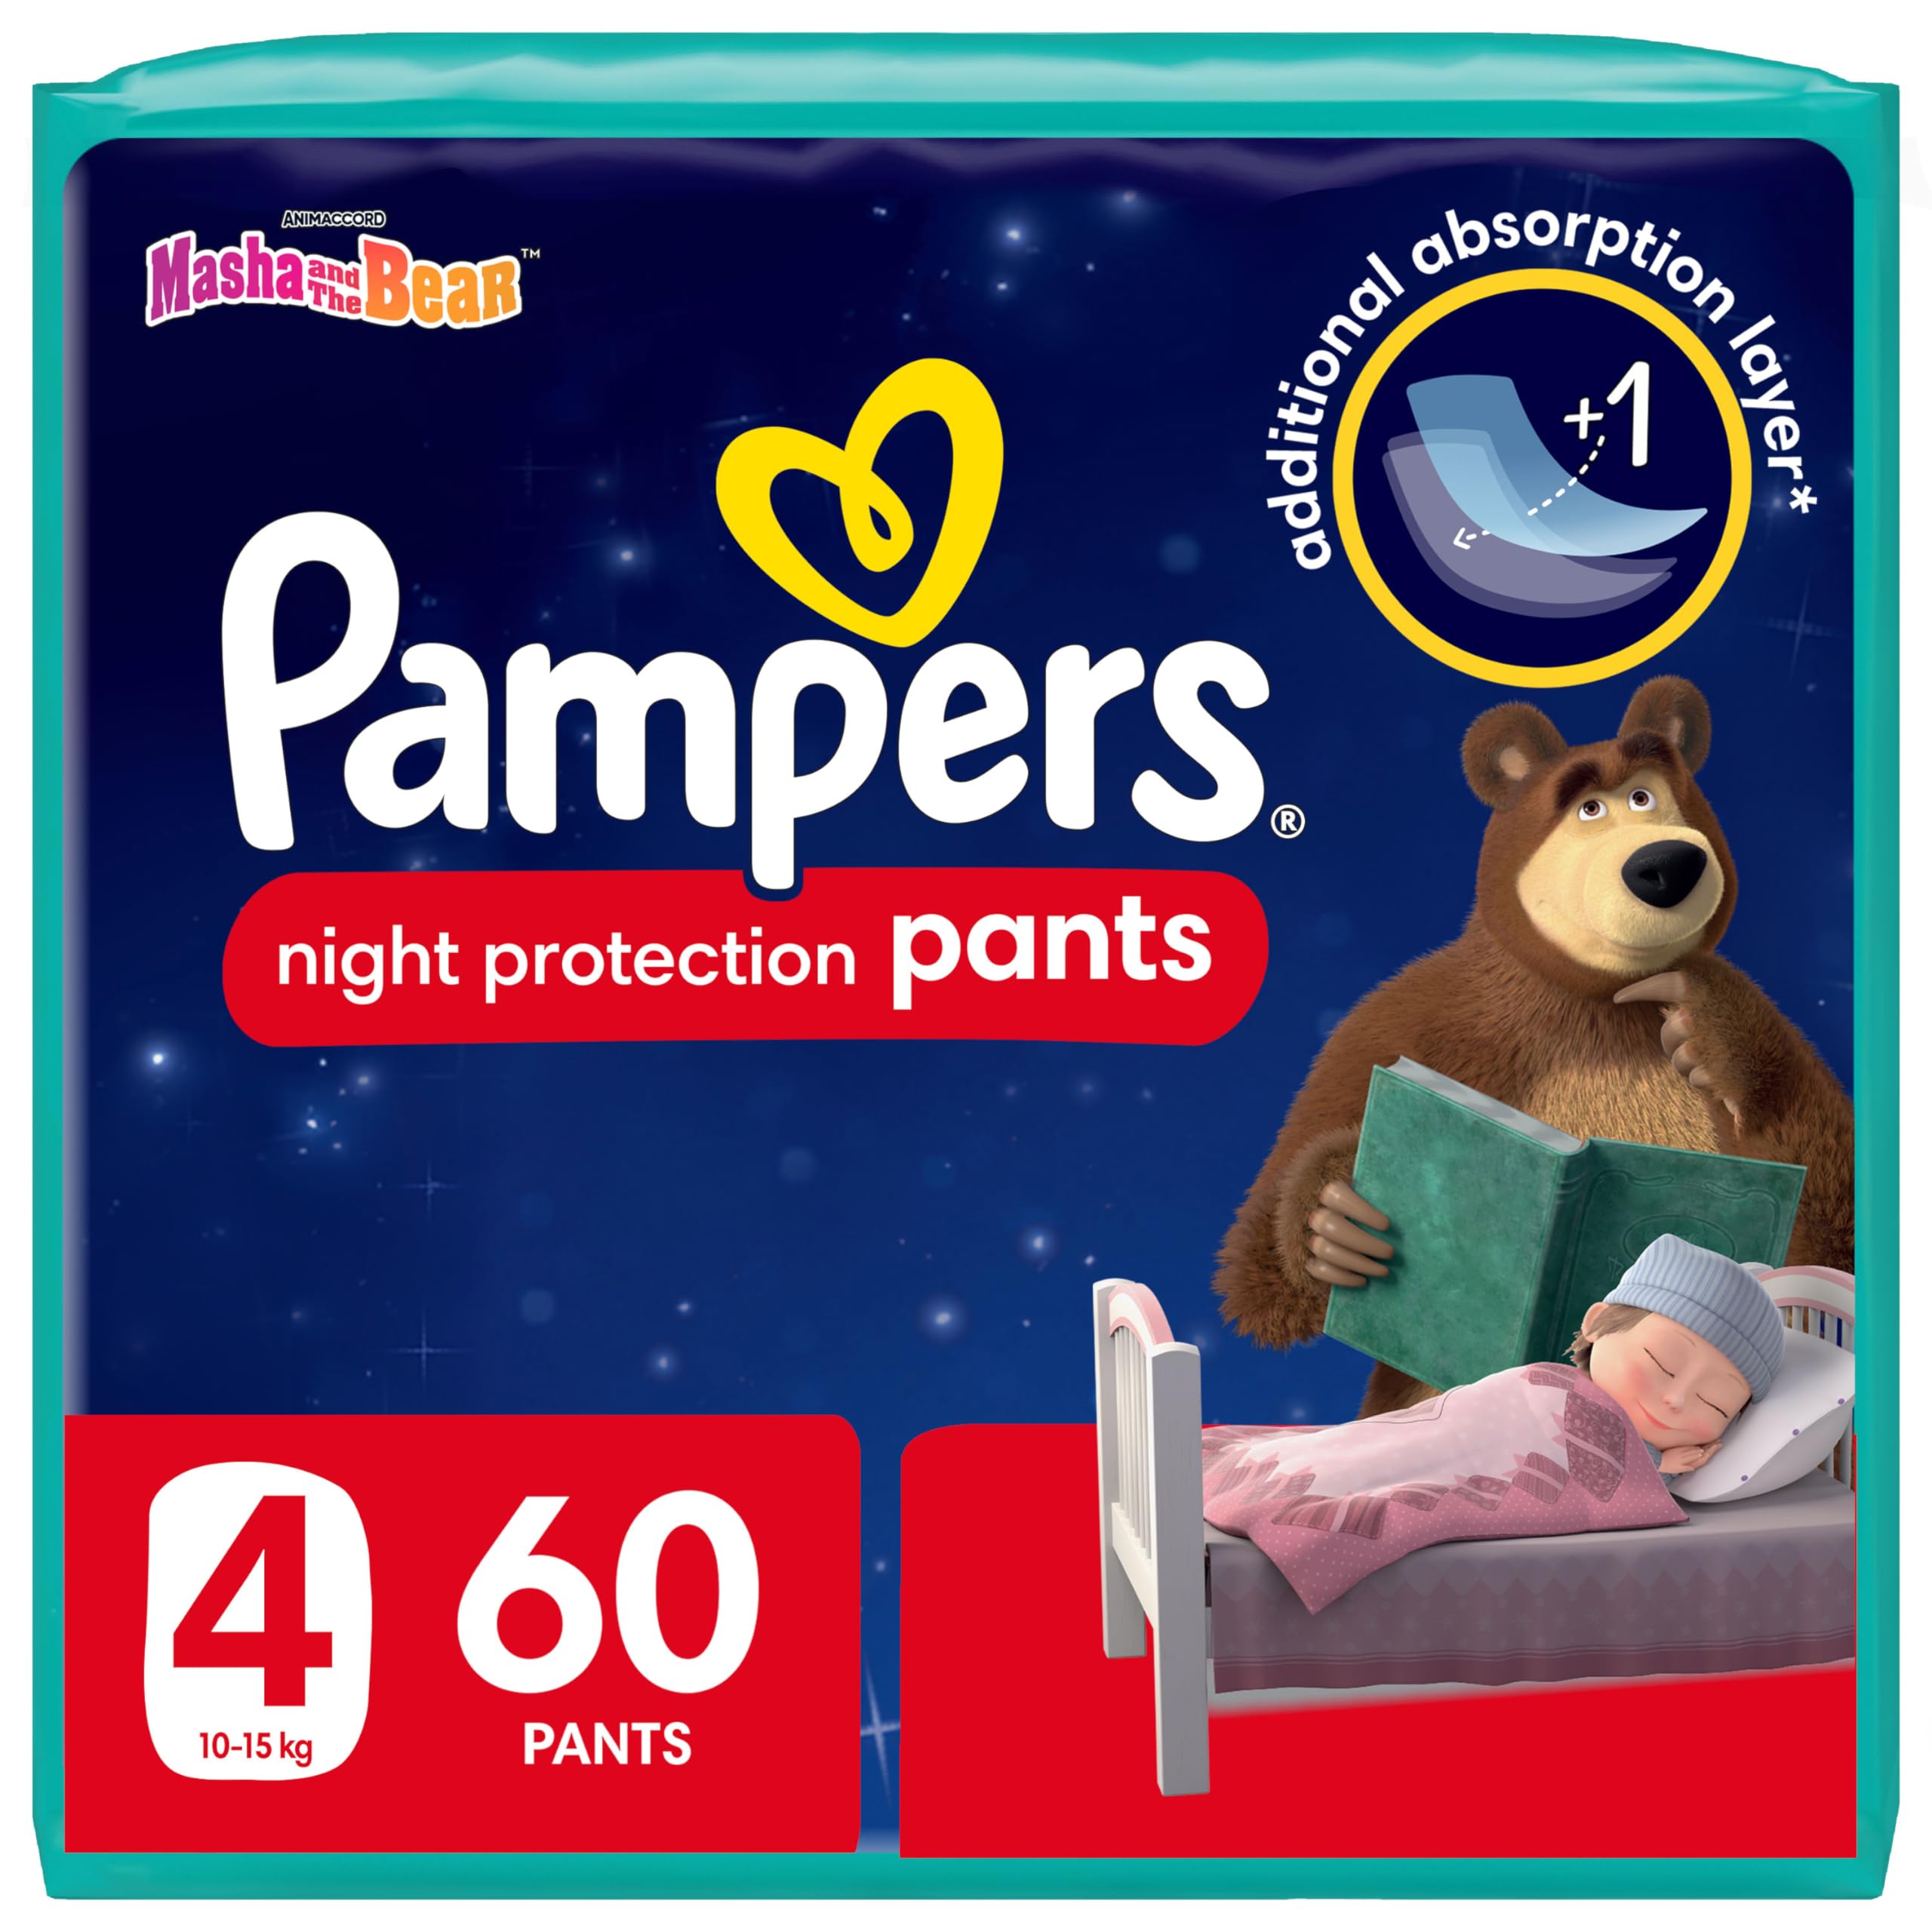 Pampers Baby-Dry Night Pants Diapers Additional Absorption Layer for Overnight Leakage Protection, Size 4, 10-15Kg, 60 Diaper Count